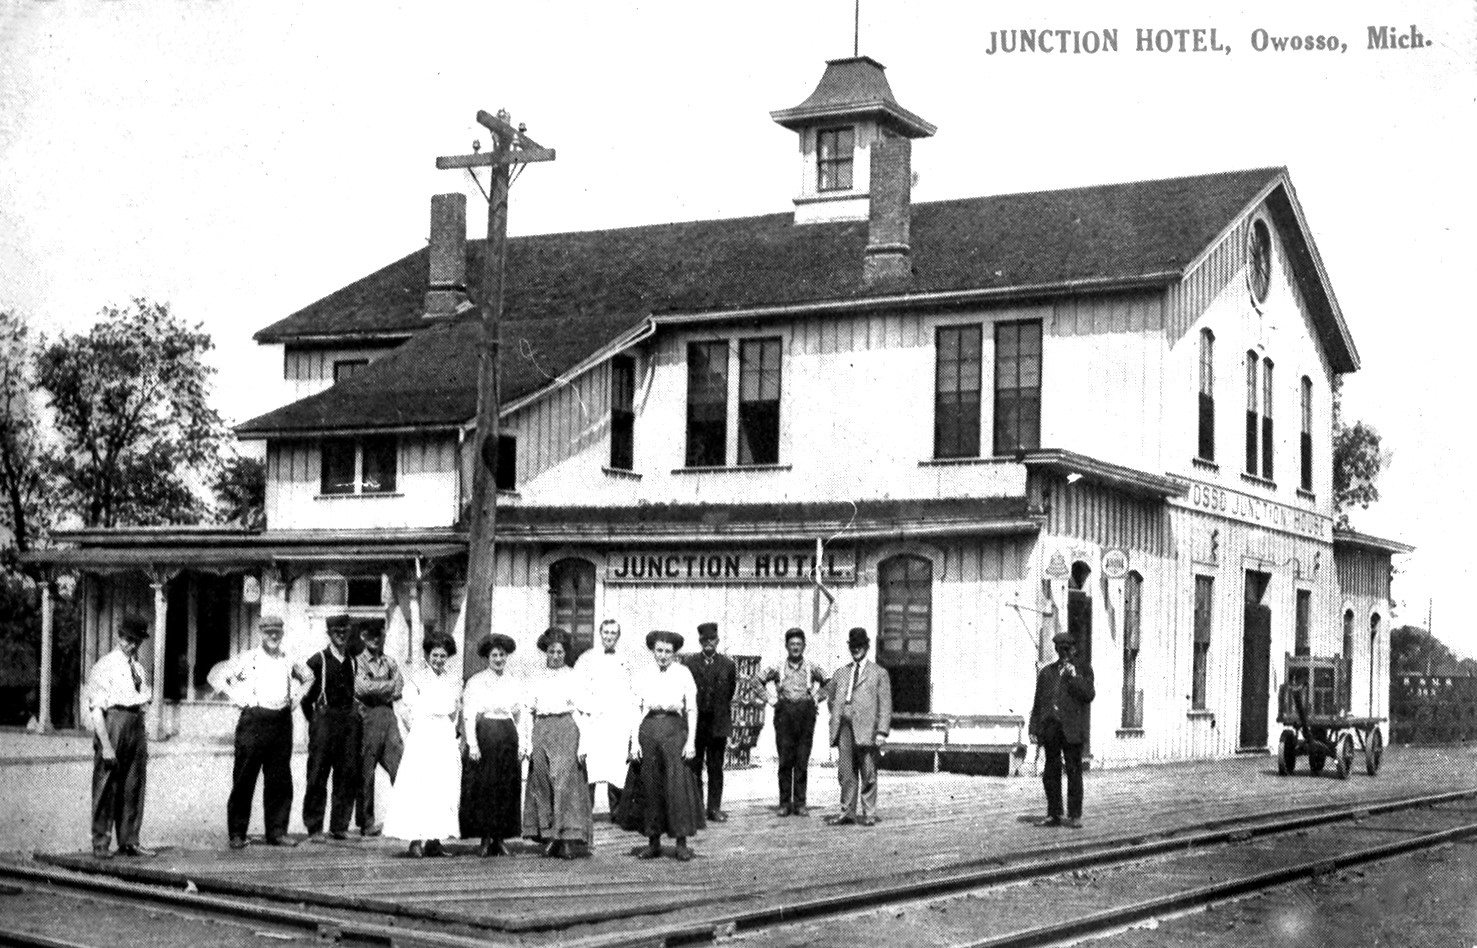 Owosso Junction Hotel